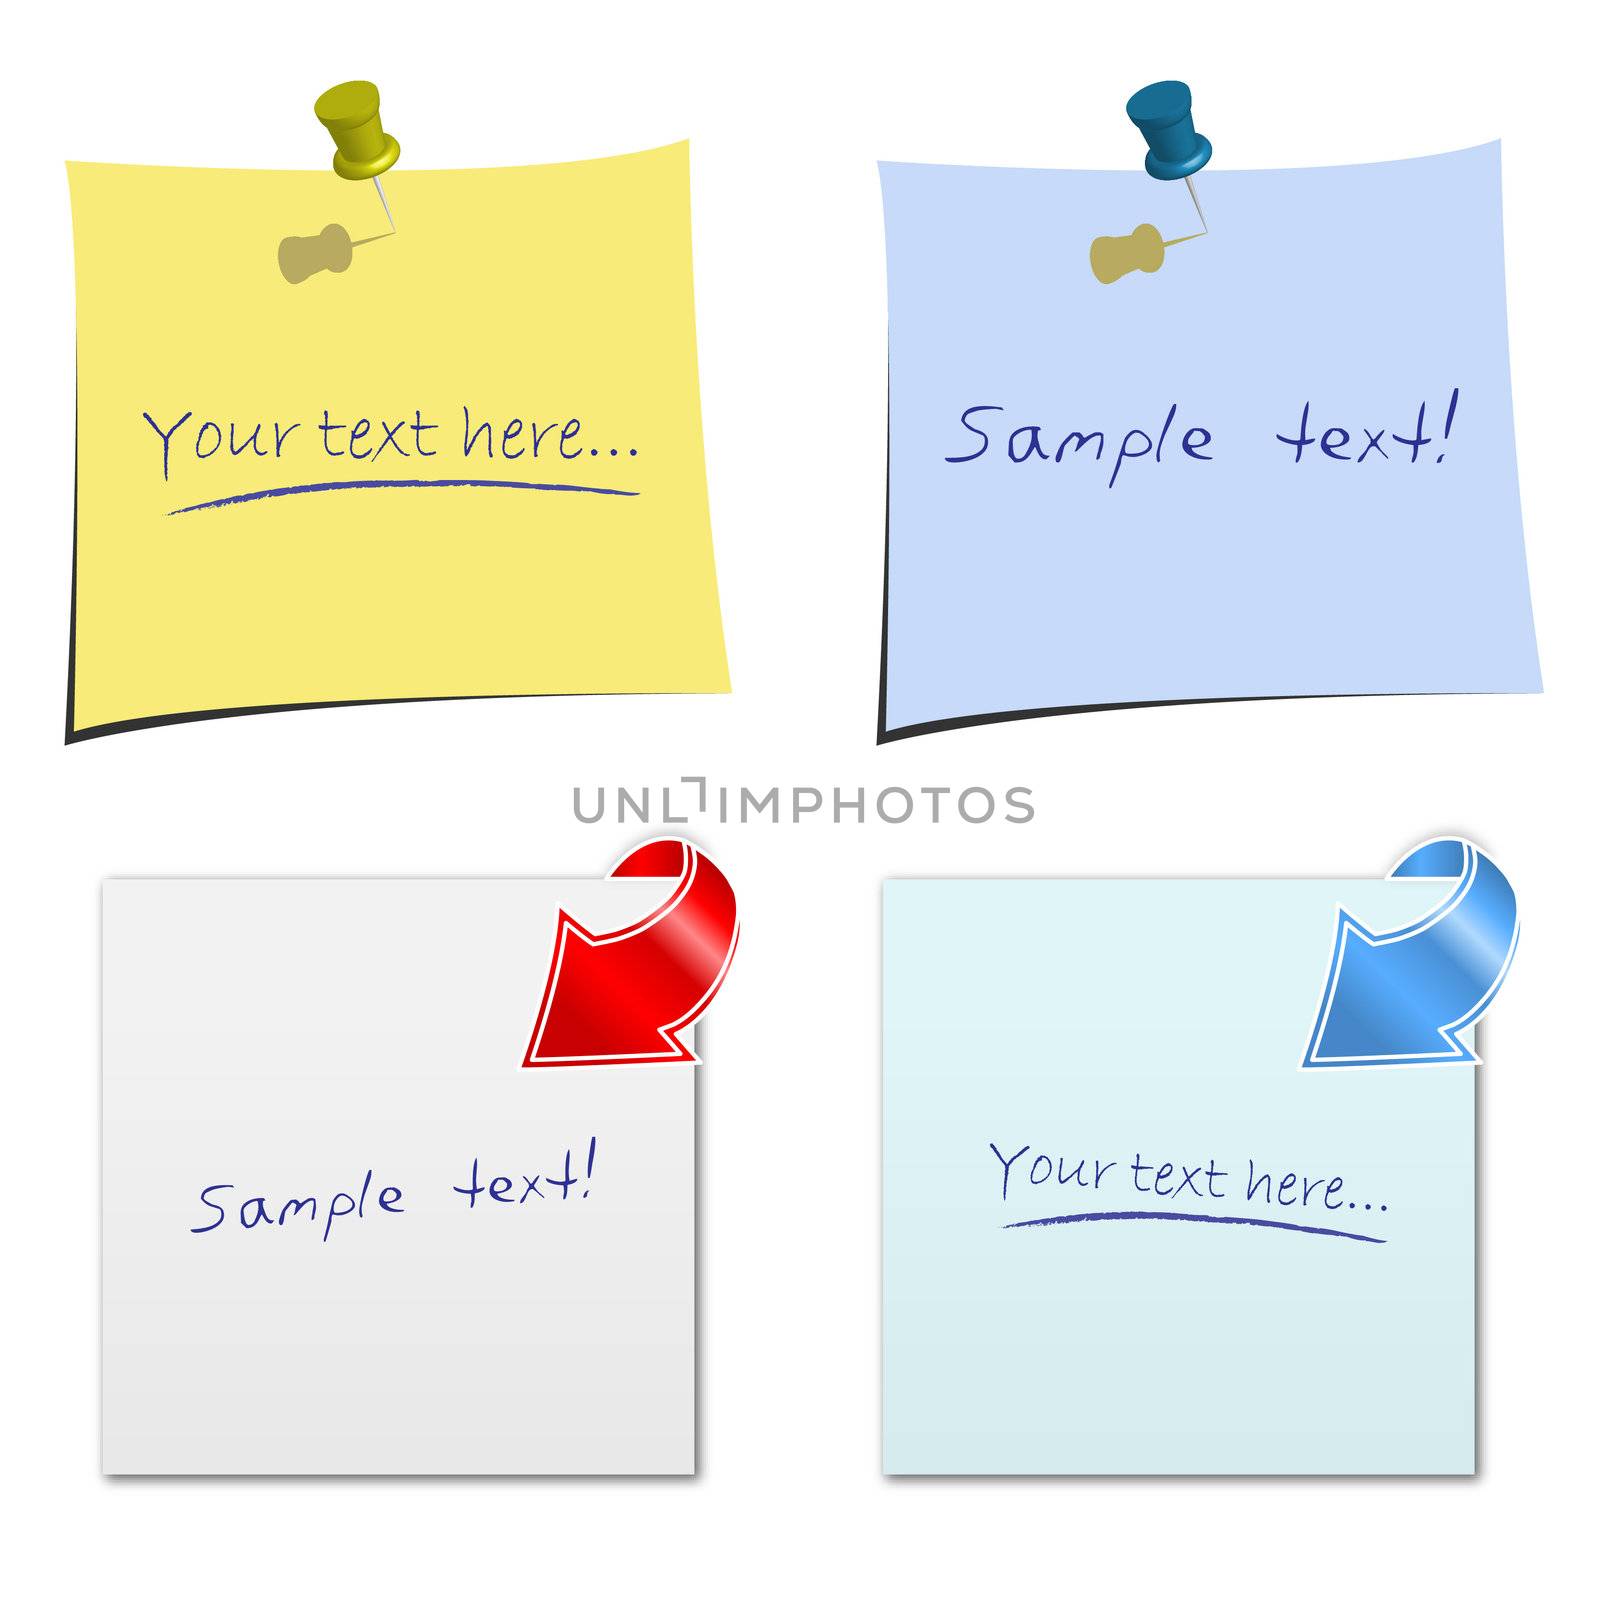 Image of various colorful notes with sample text isolated on a white background.